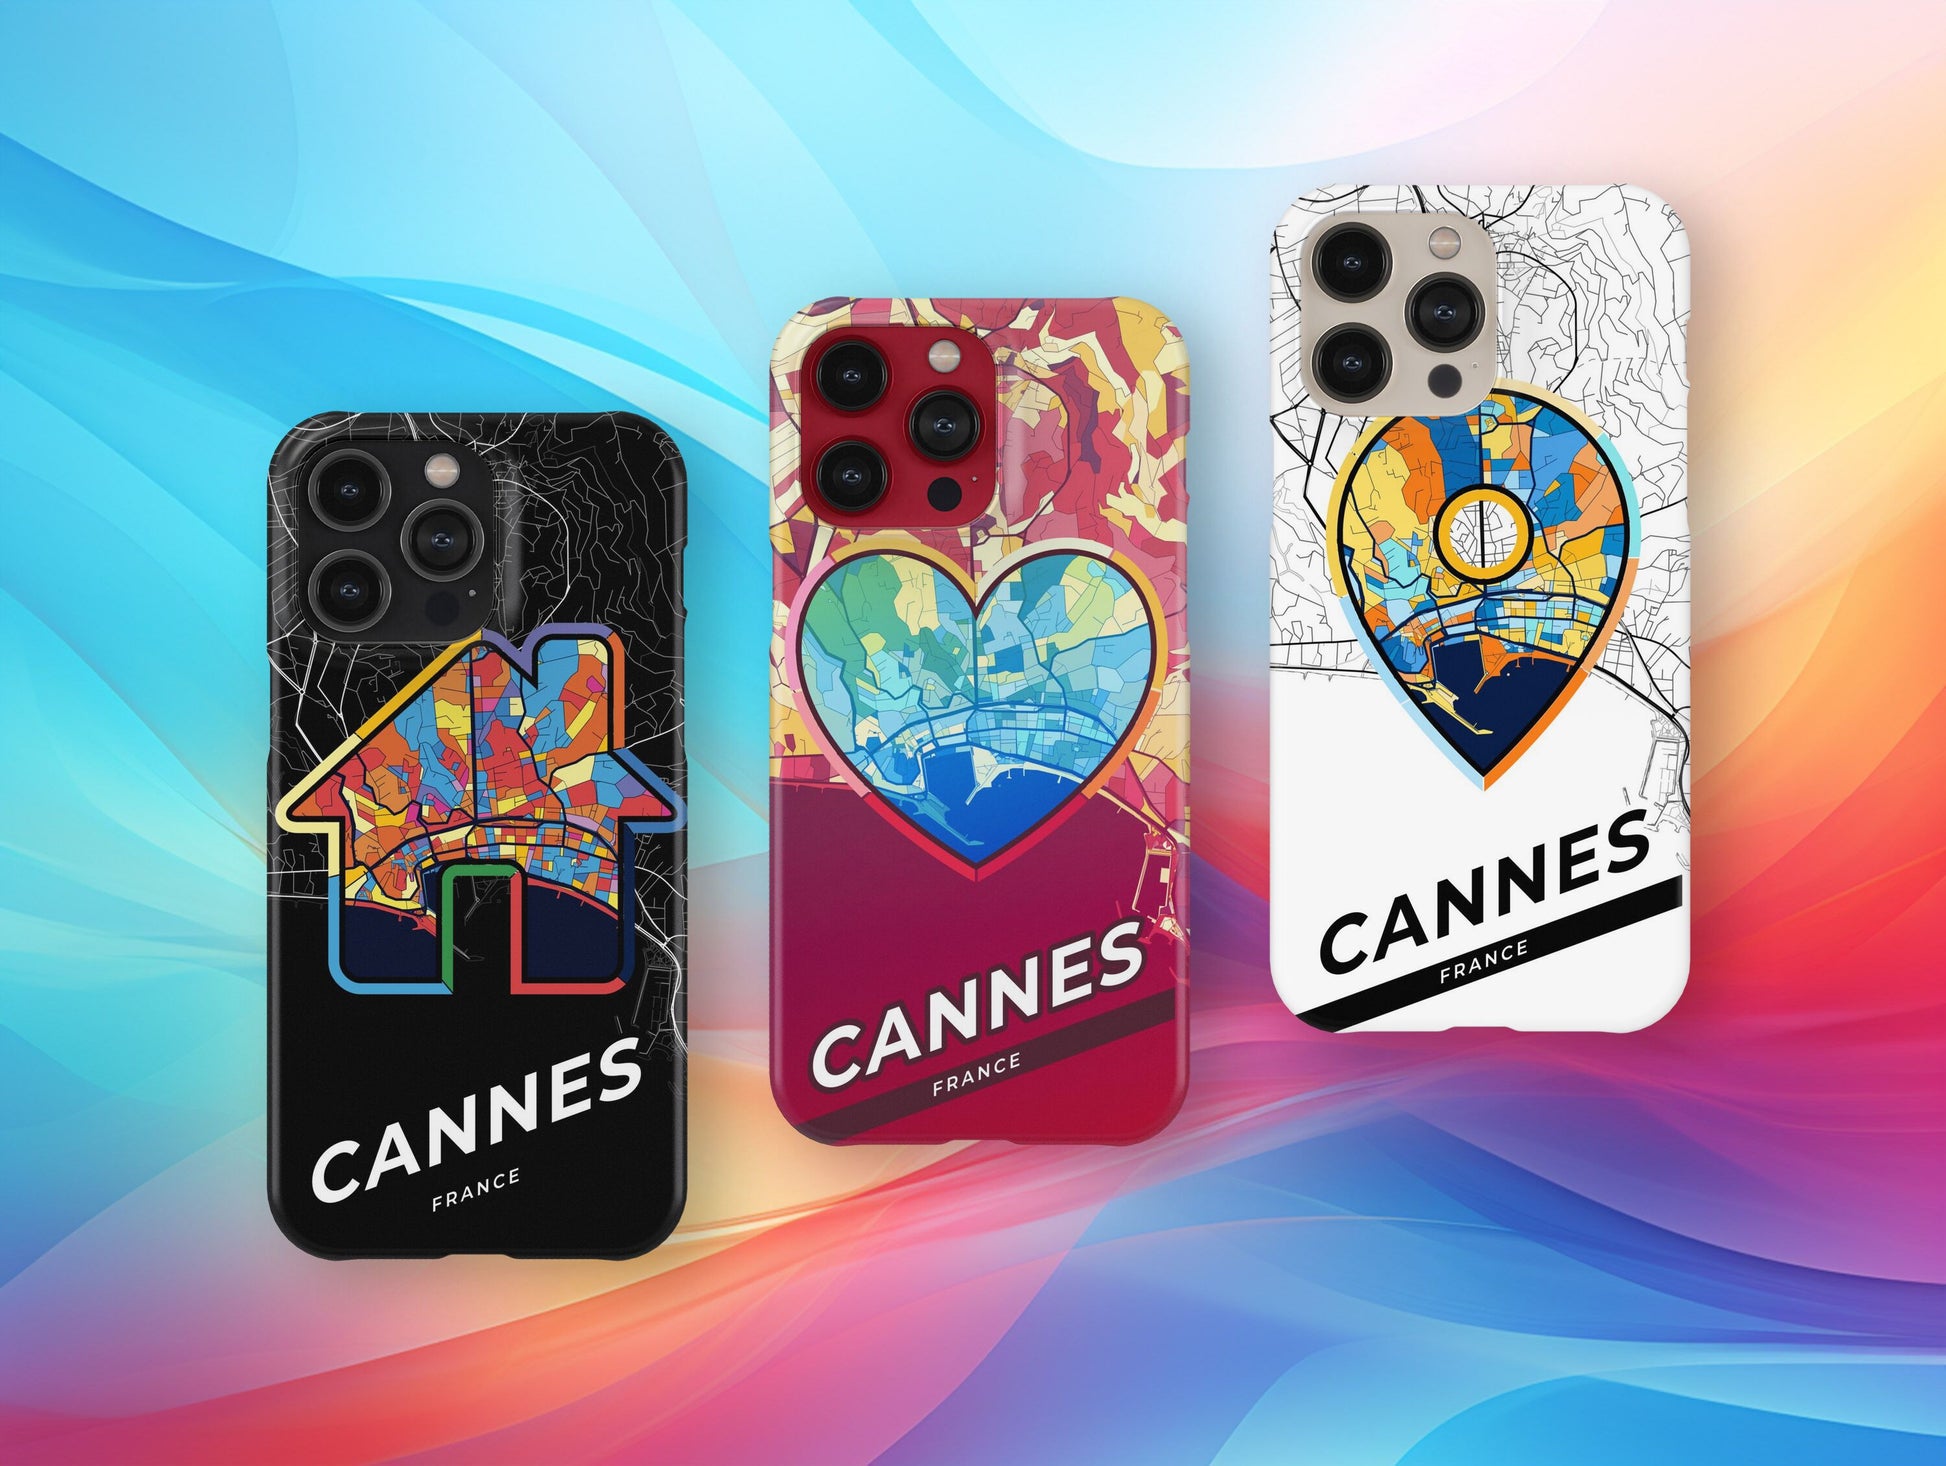 Cannes France slim phone case with colorful icon. Birthday, wedding or housewarming gift. Couple match cases.